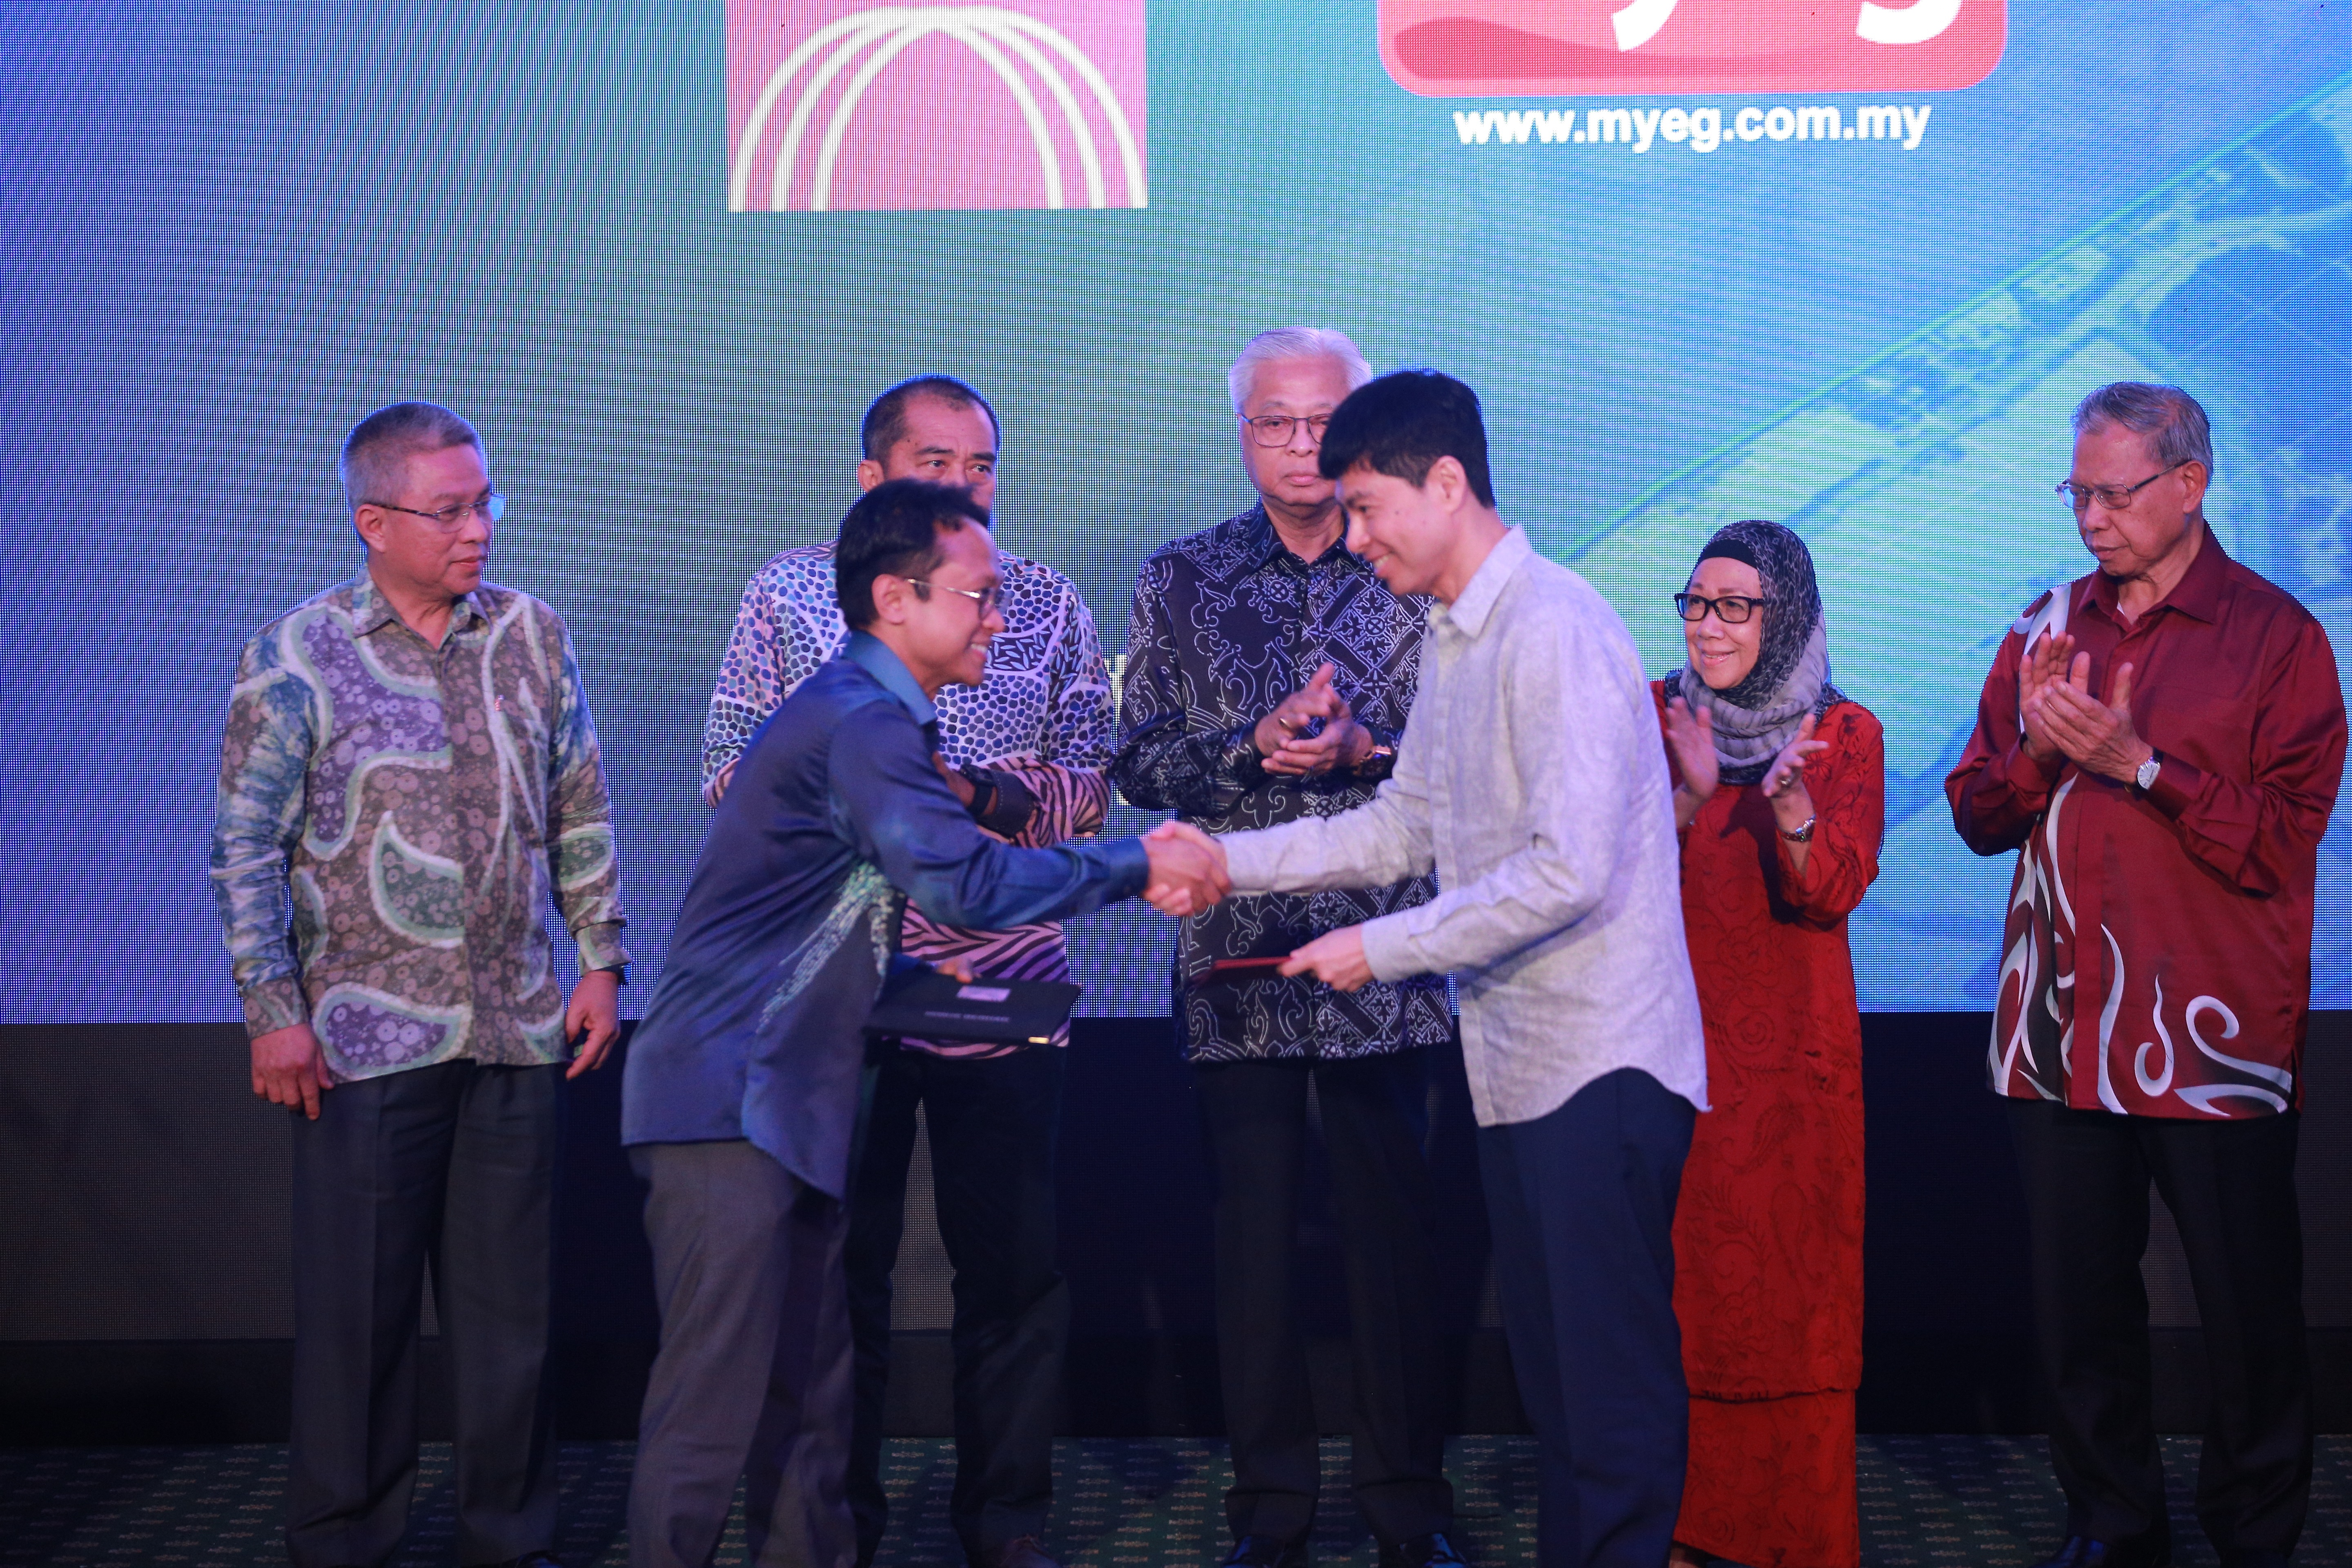 Dr. Iskandar Samad, CEO of MIMOS Global (front, left), and Wong Thean Soon, group managing director of MYEG Services Bhd (front, right) exchanging the MOU under the witness of Ismail Sabri bin Yaakob, Prime Minister of Malaysia